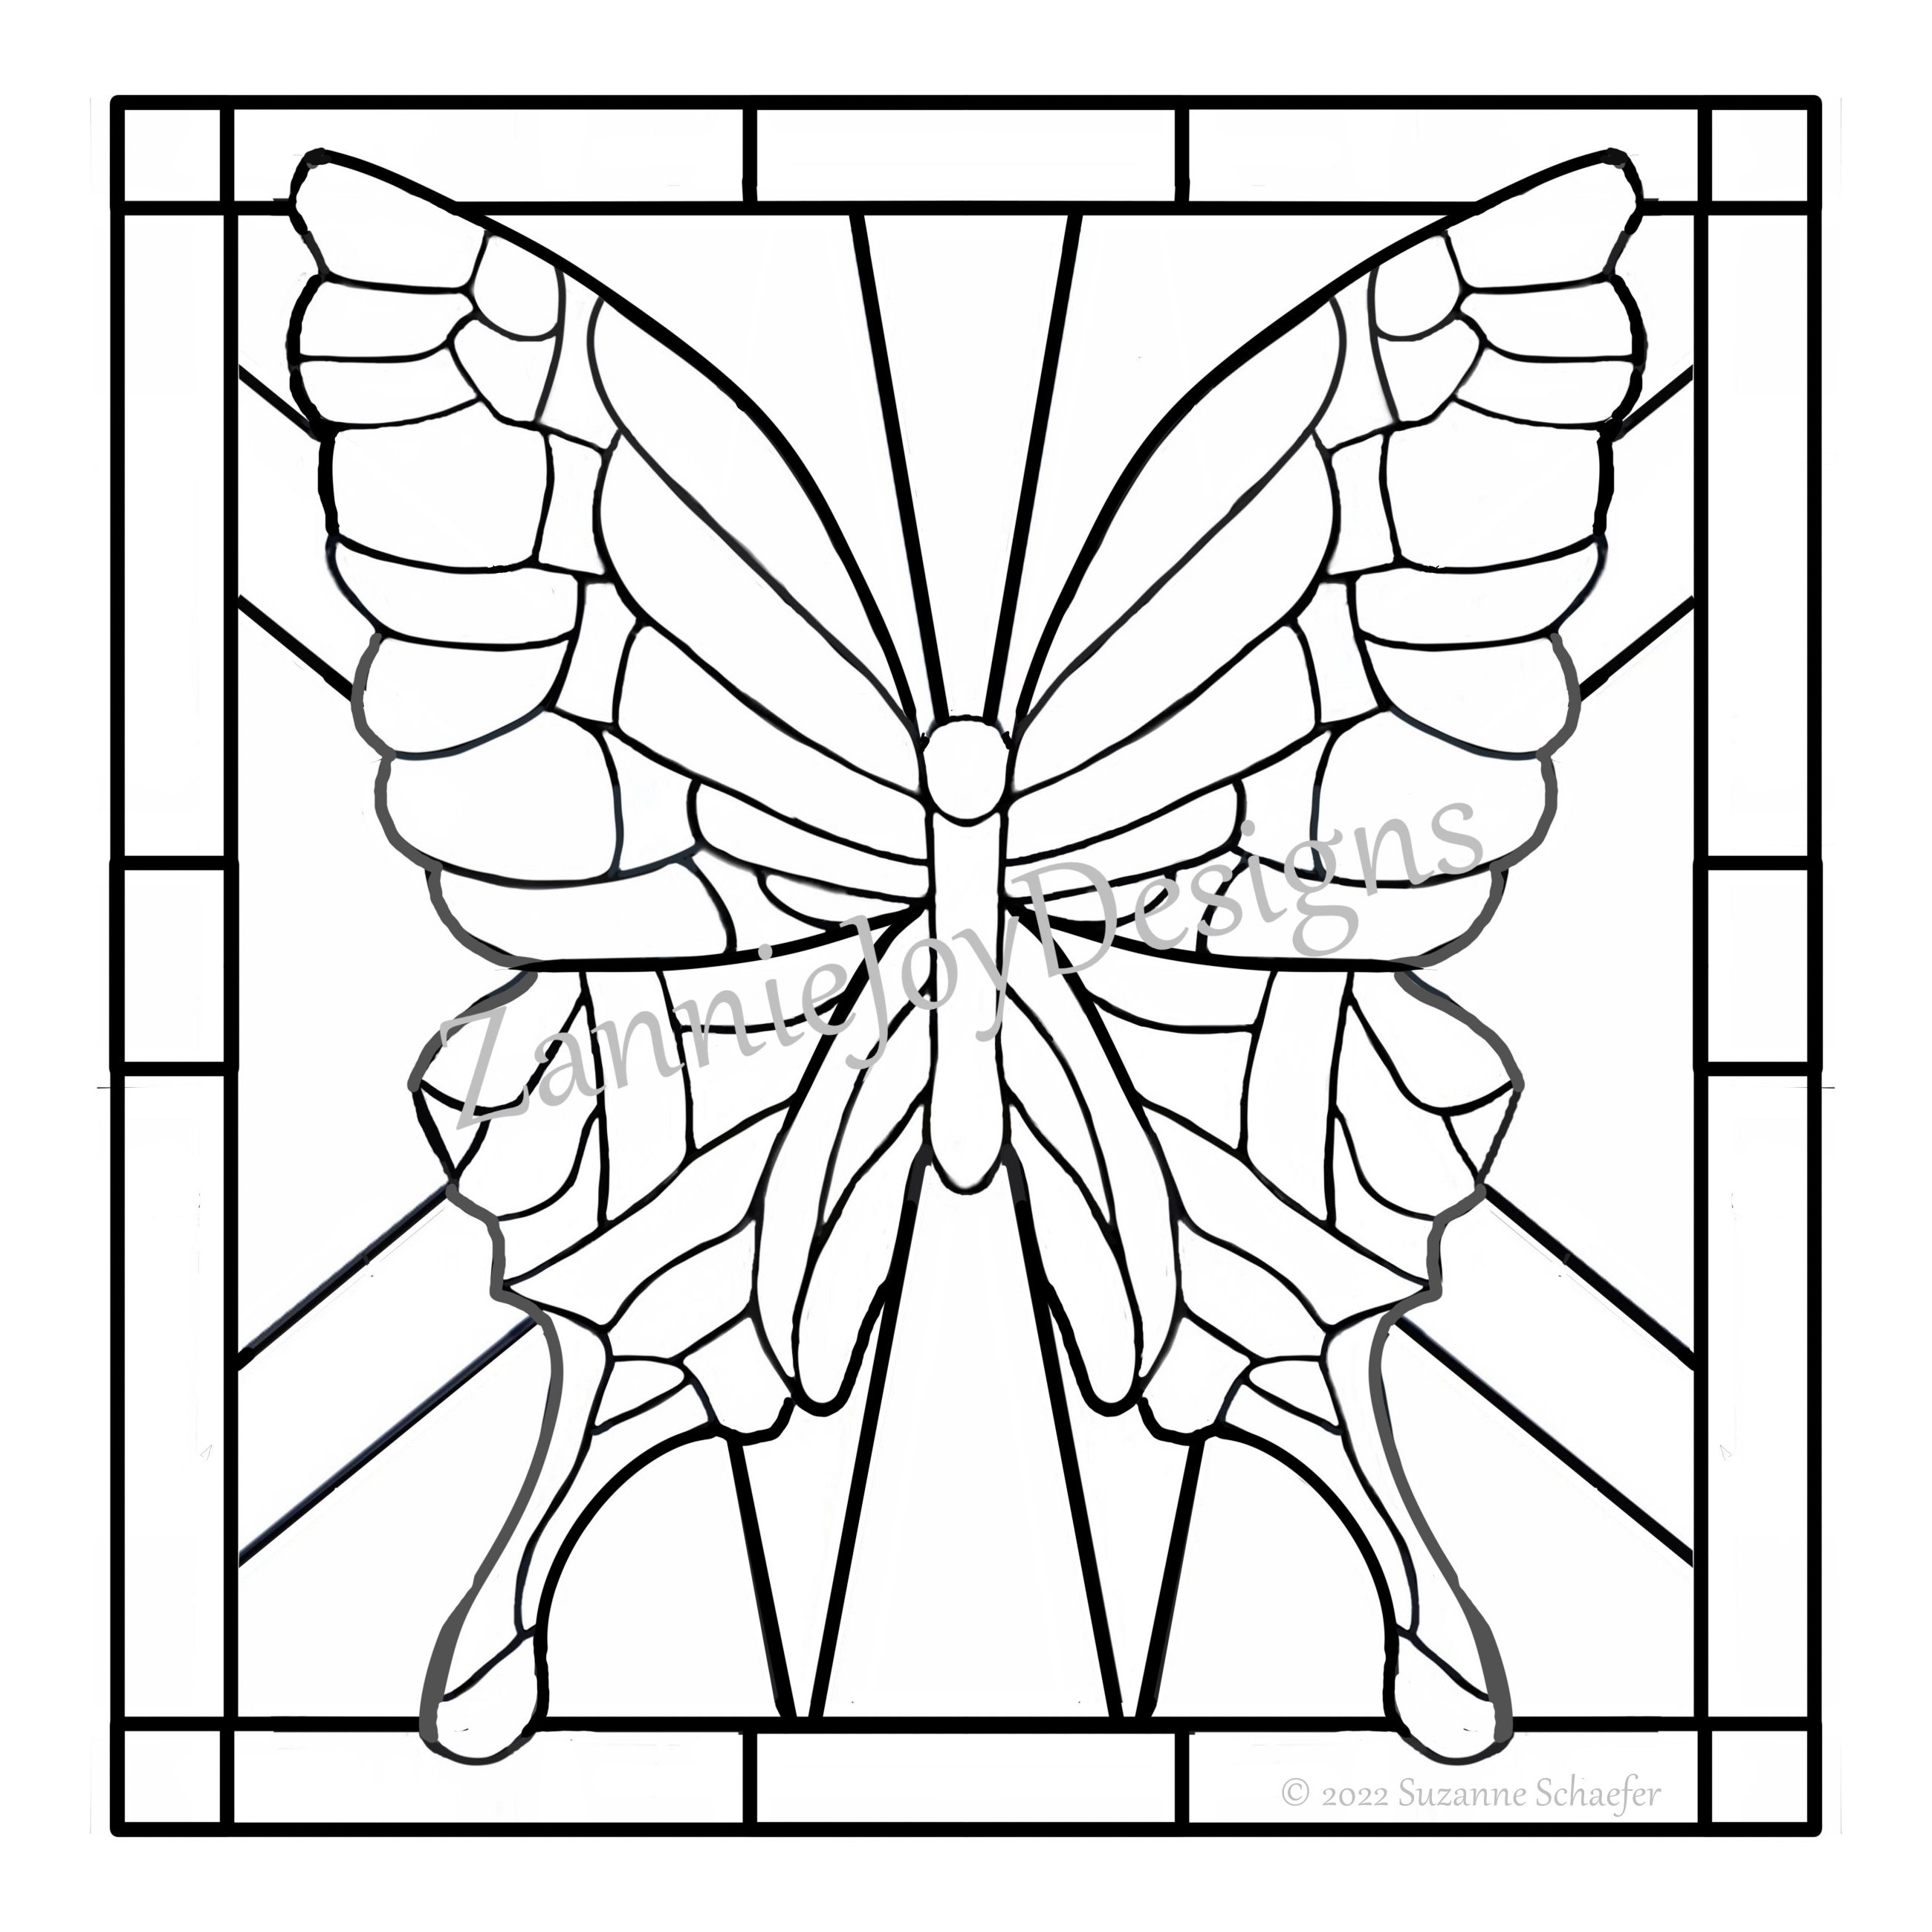 Stain glass coloring pages, Hit A 21 Discount massive deal ...